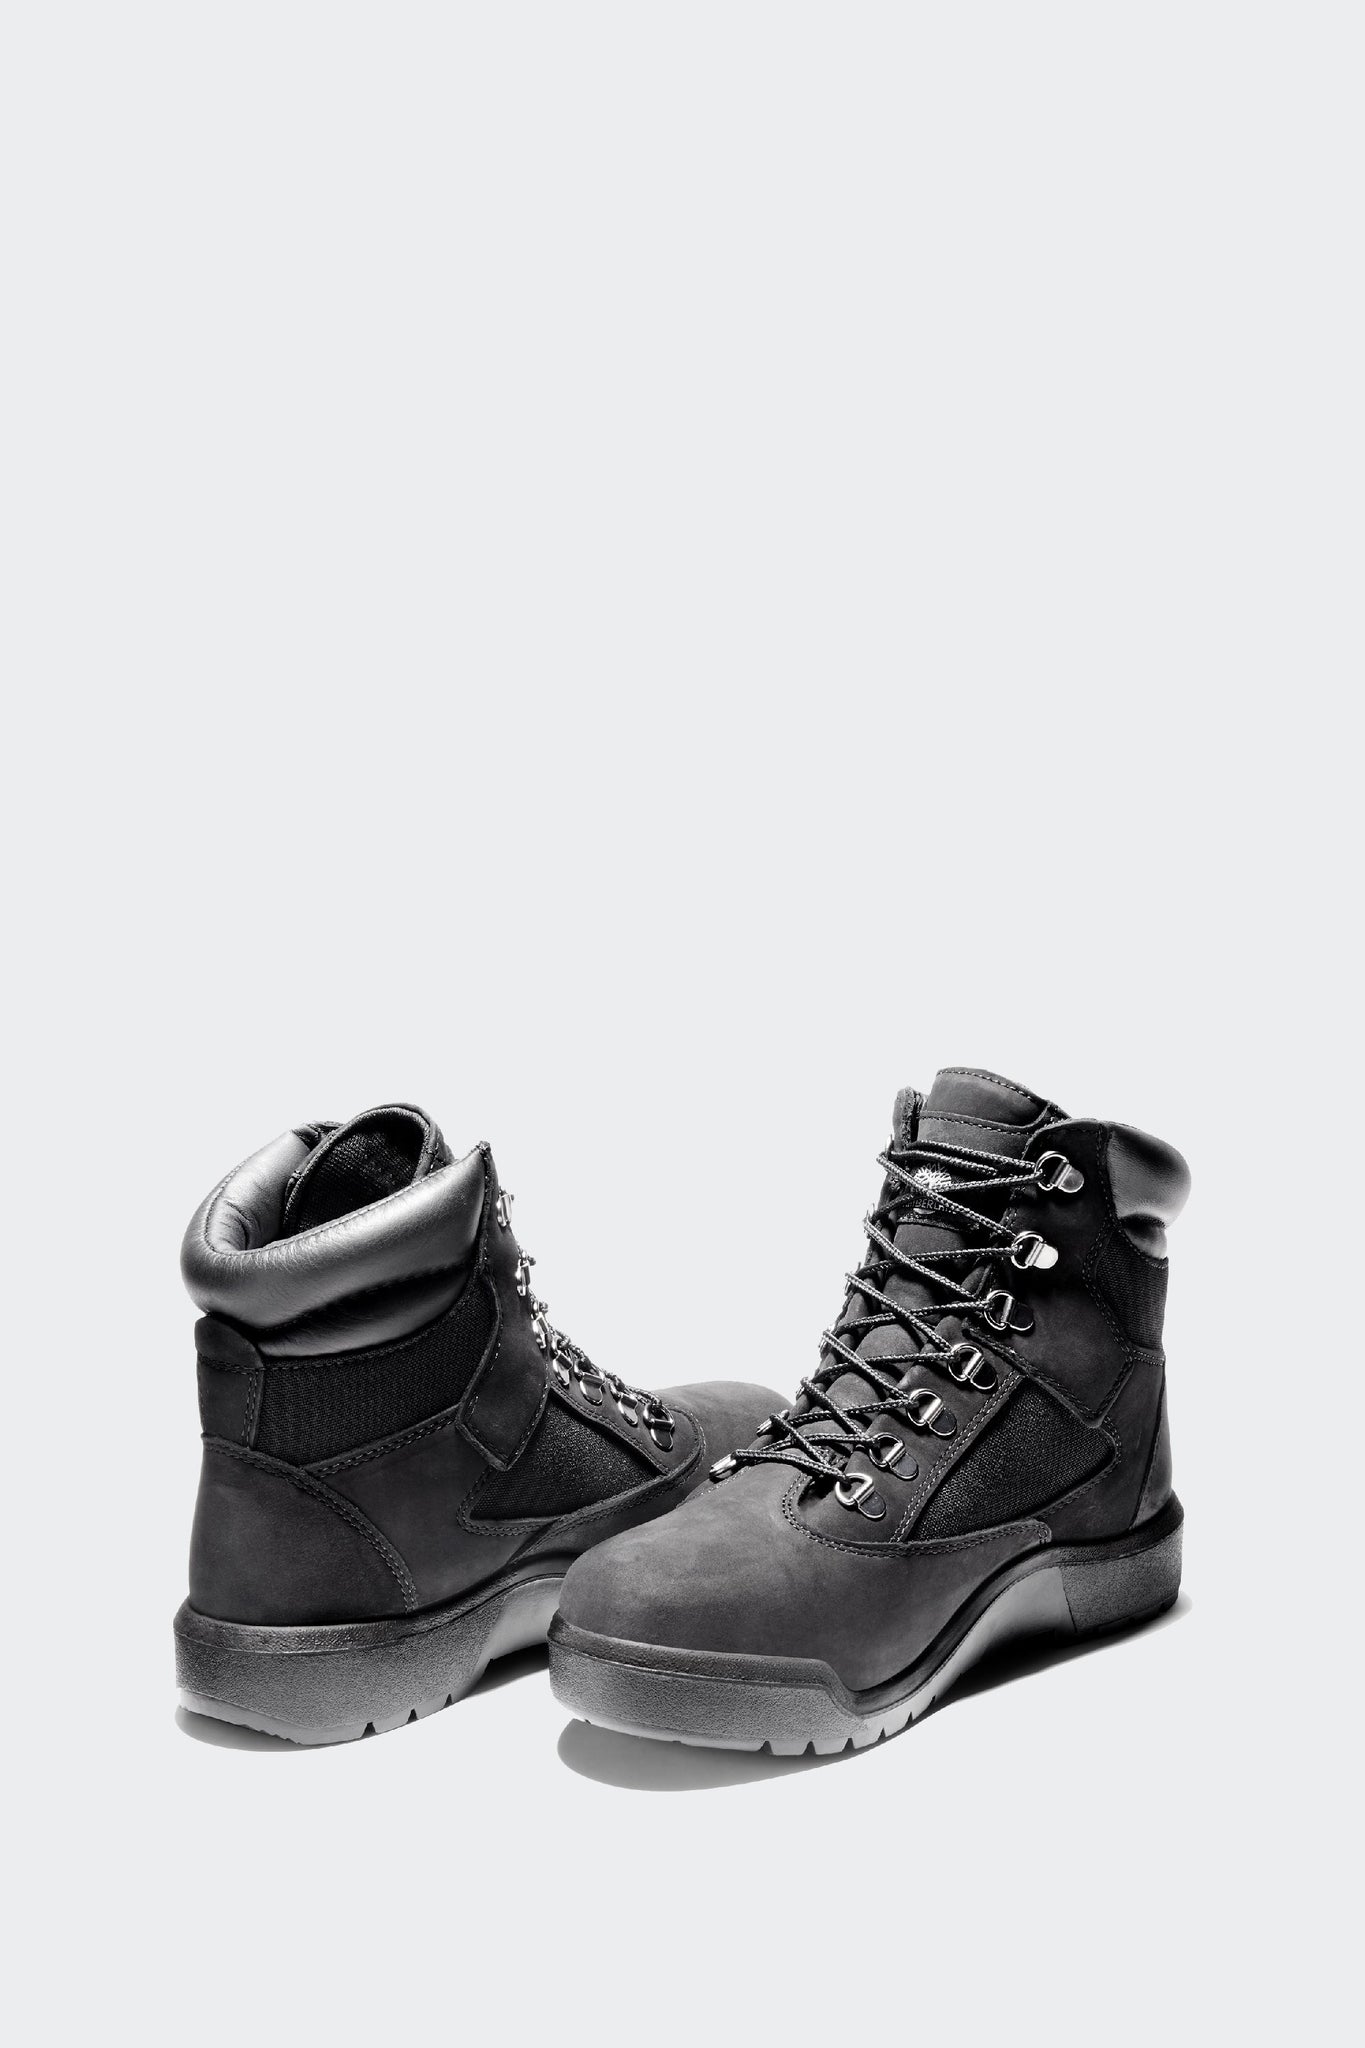 6-INCH FIELD BOOTS